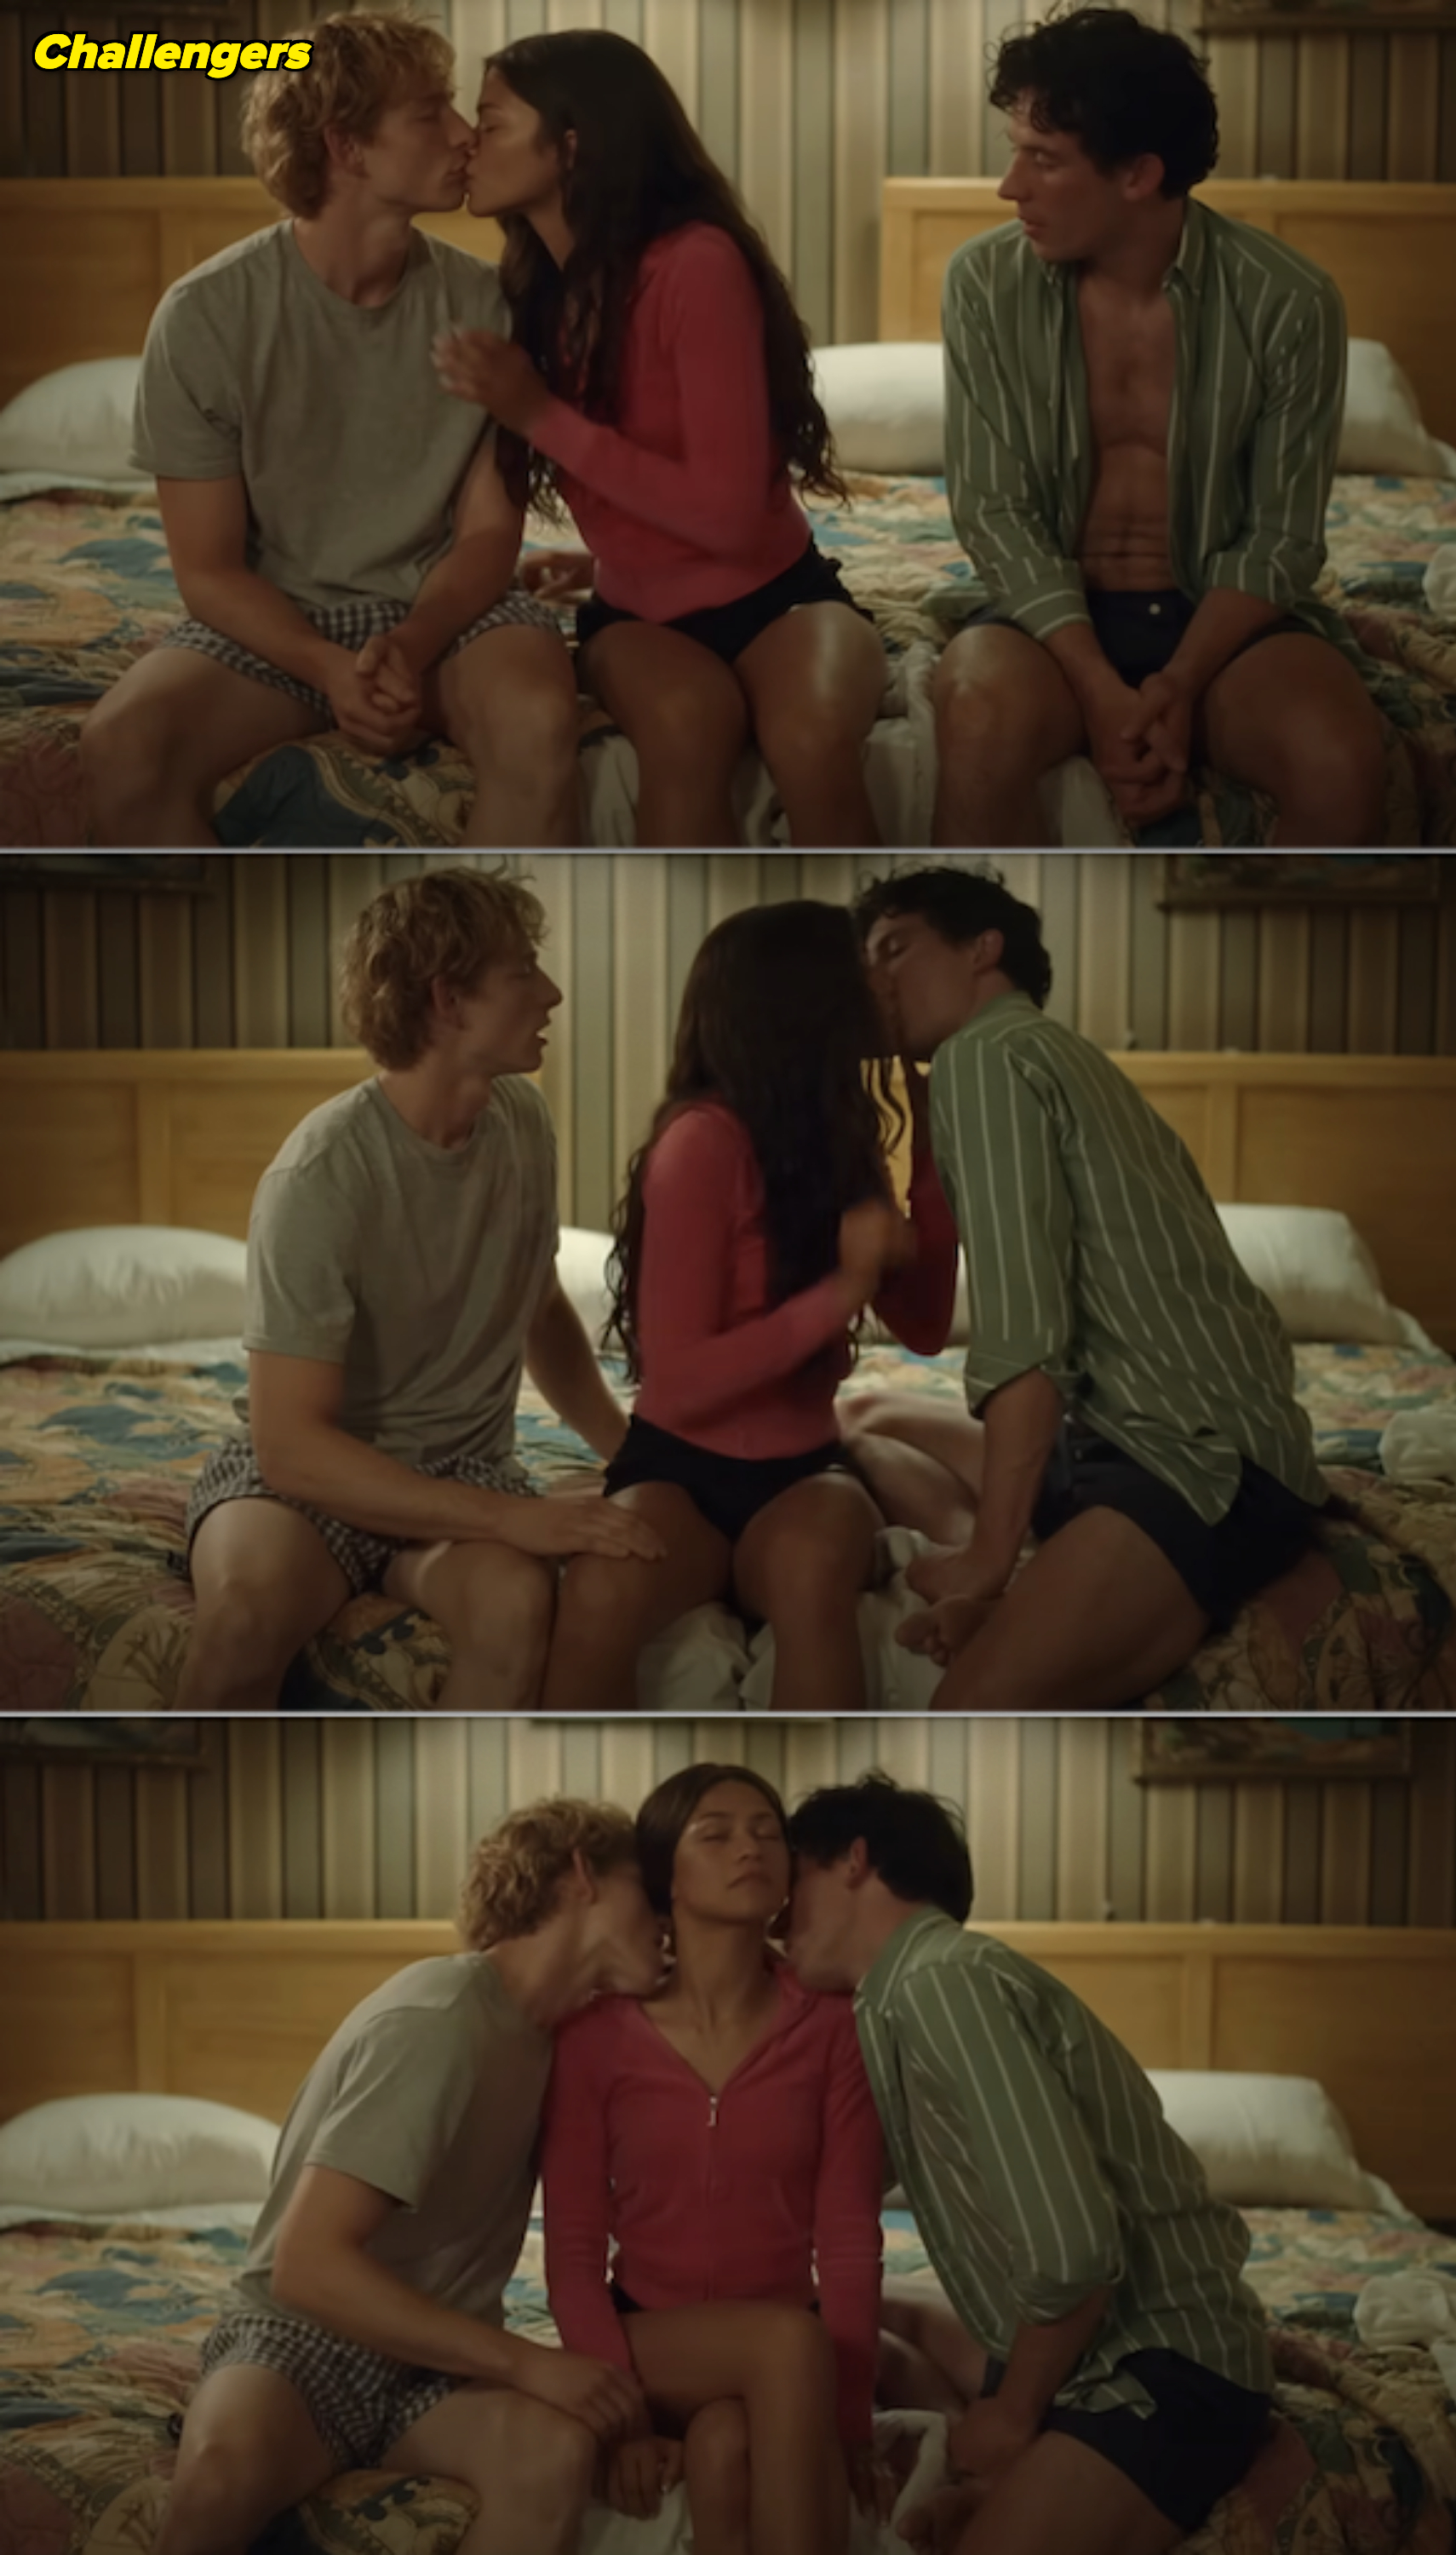 Zendaya, Mike Faist, and Josh O&#x27;Connor kissing on the bed in &quot;Challengers&quot;